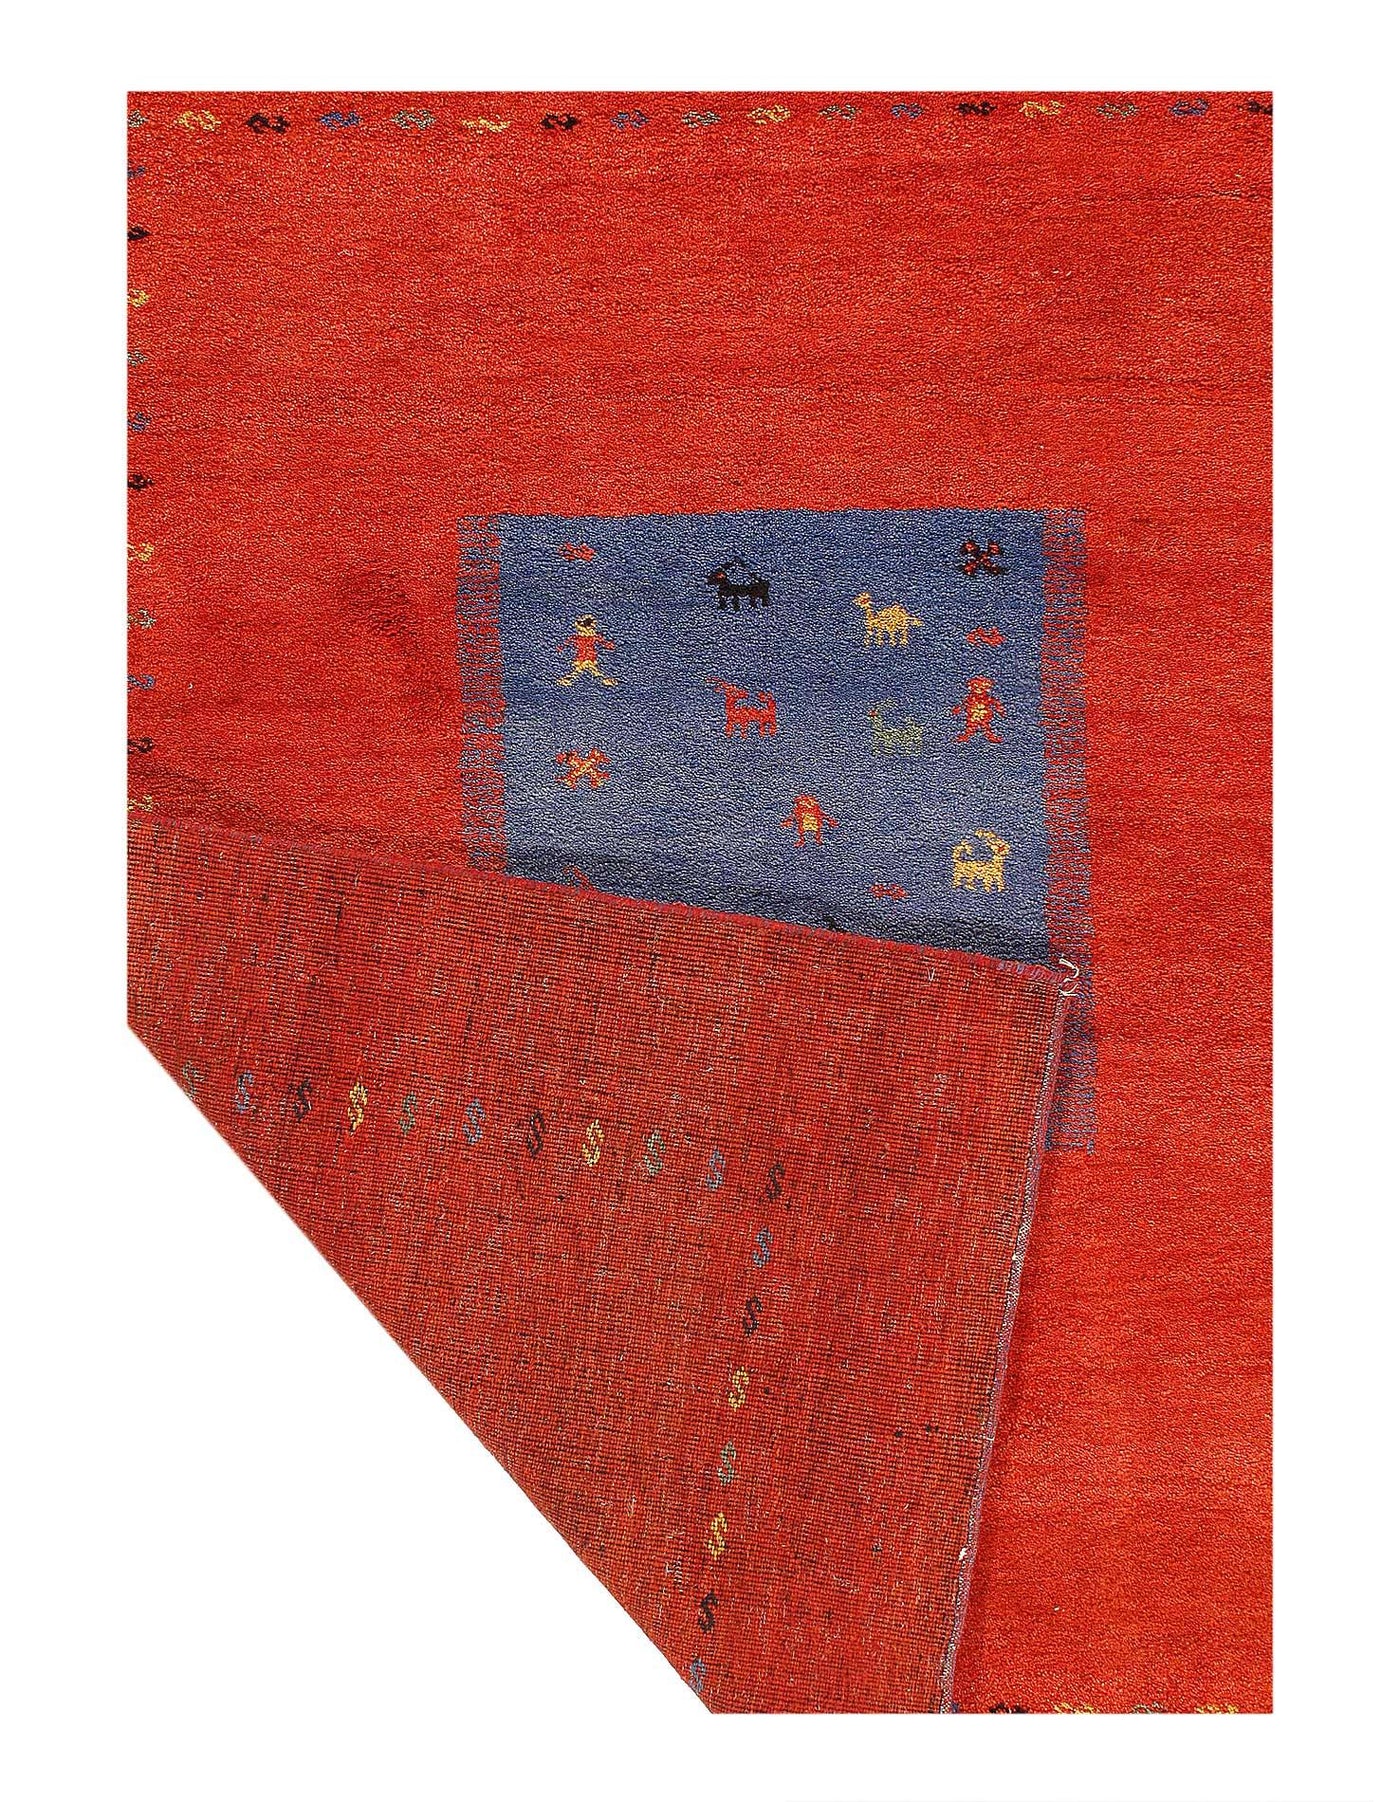 Canvello Handmade Blue And Red Area Rug - 6'10" x 8'3"